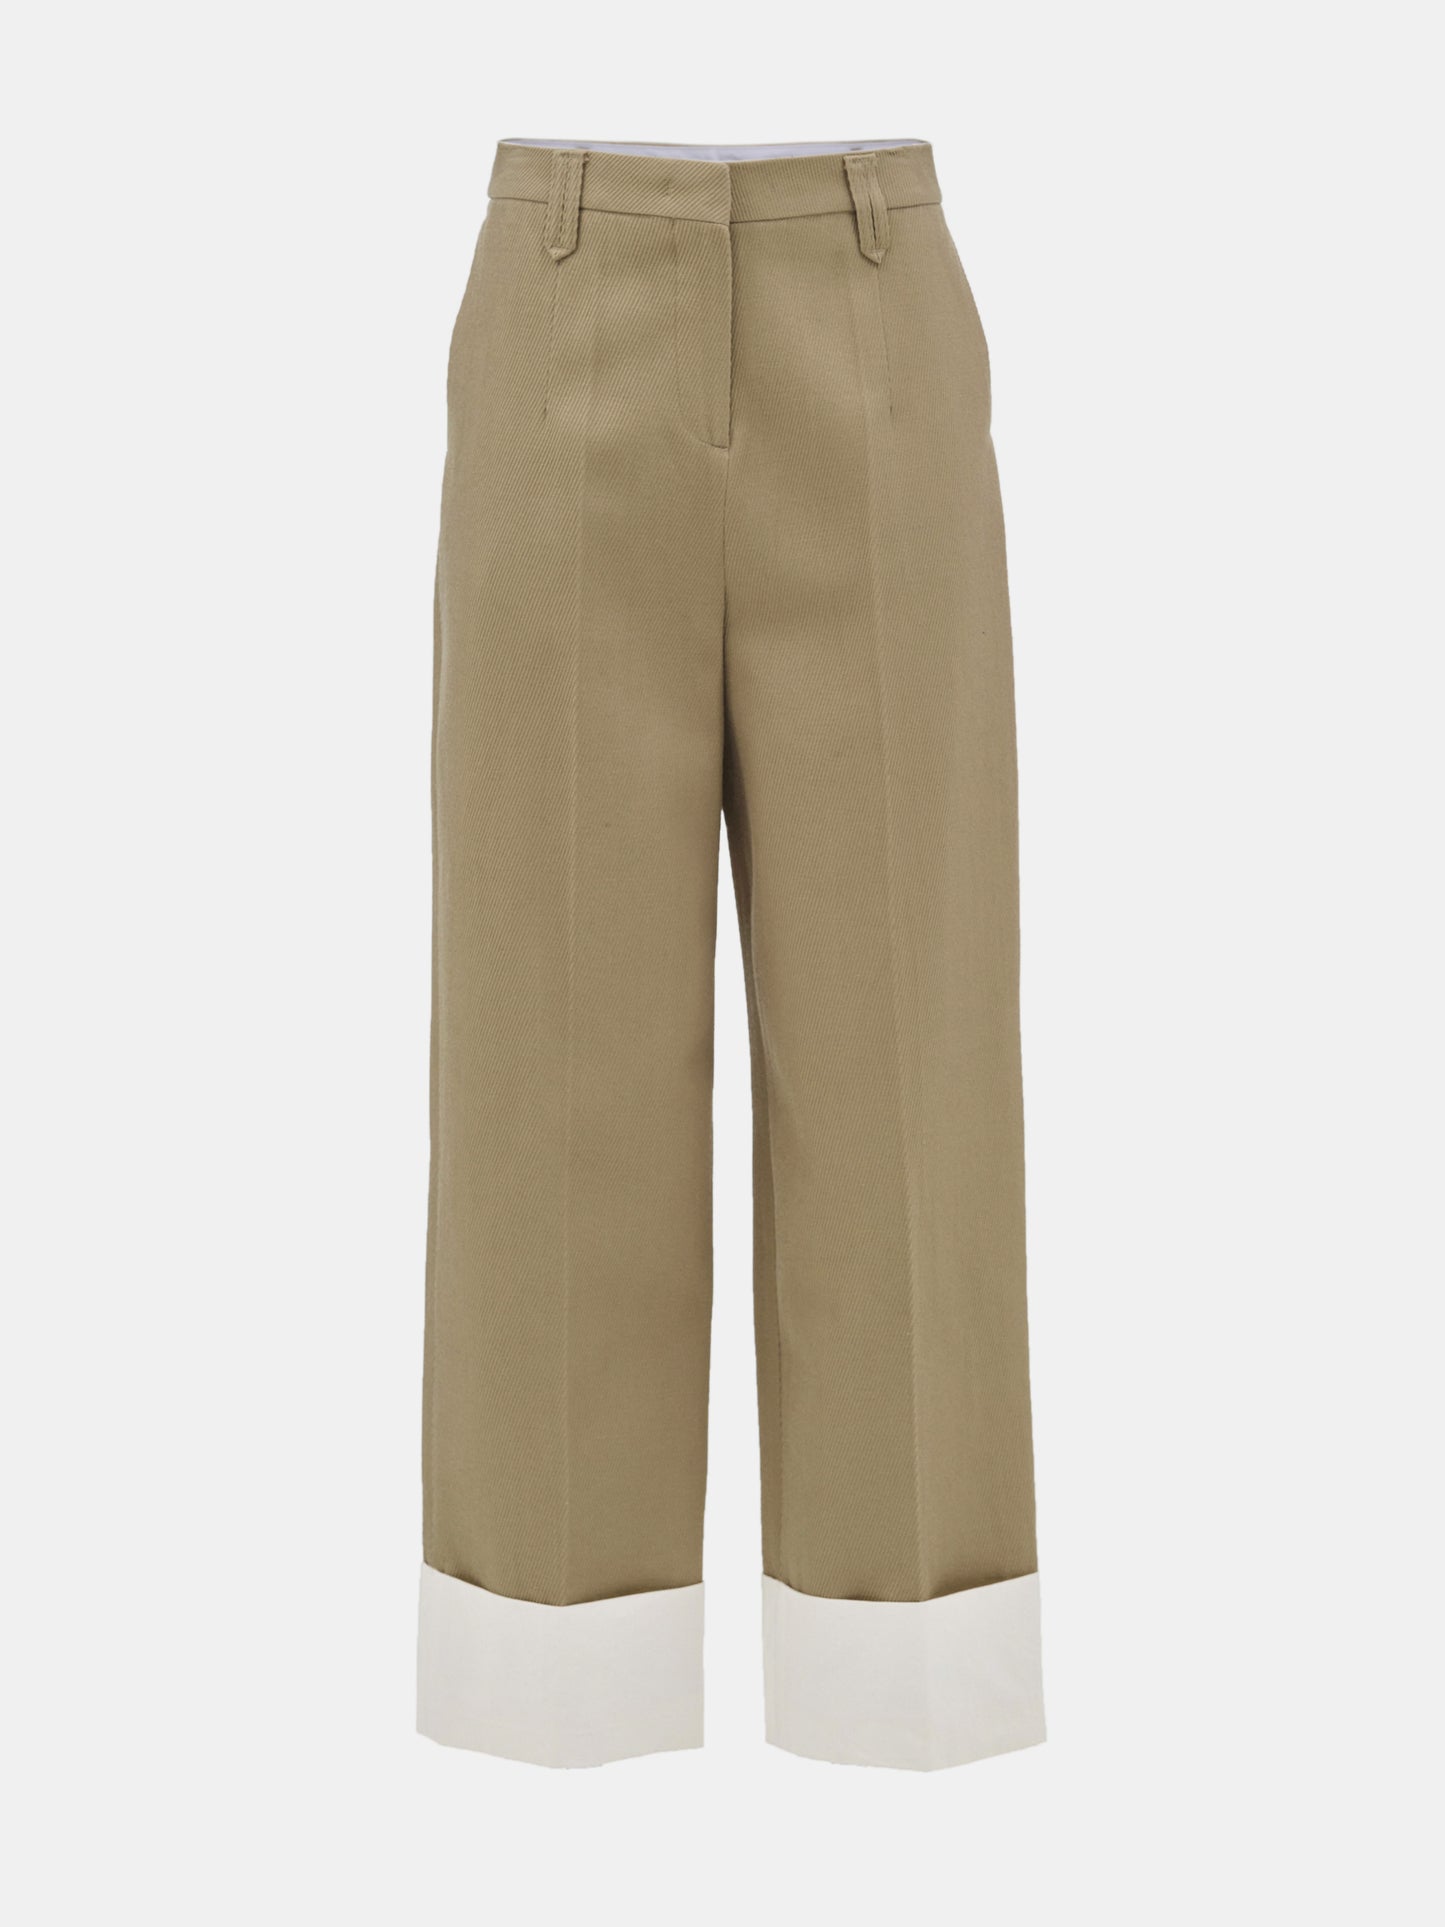 Klive Turn-Up Trousers, Sand Dune